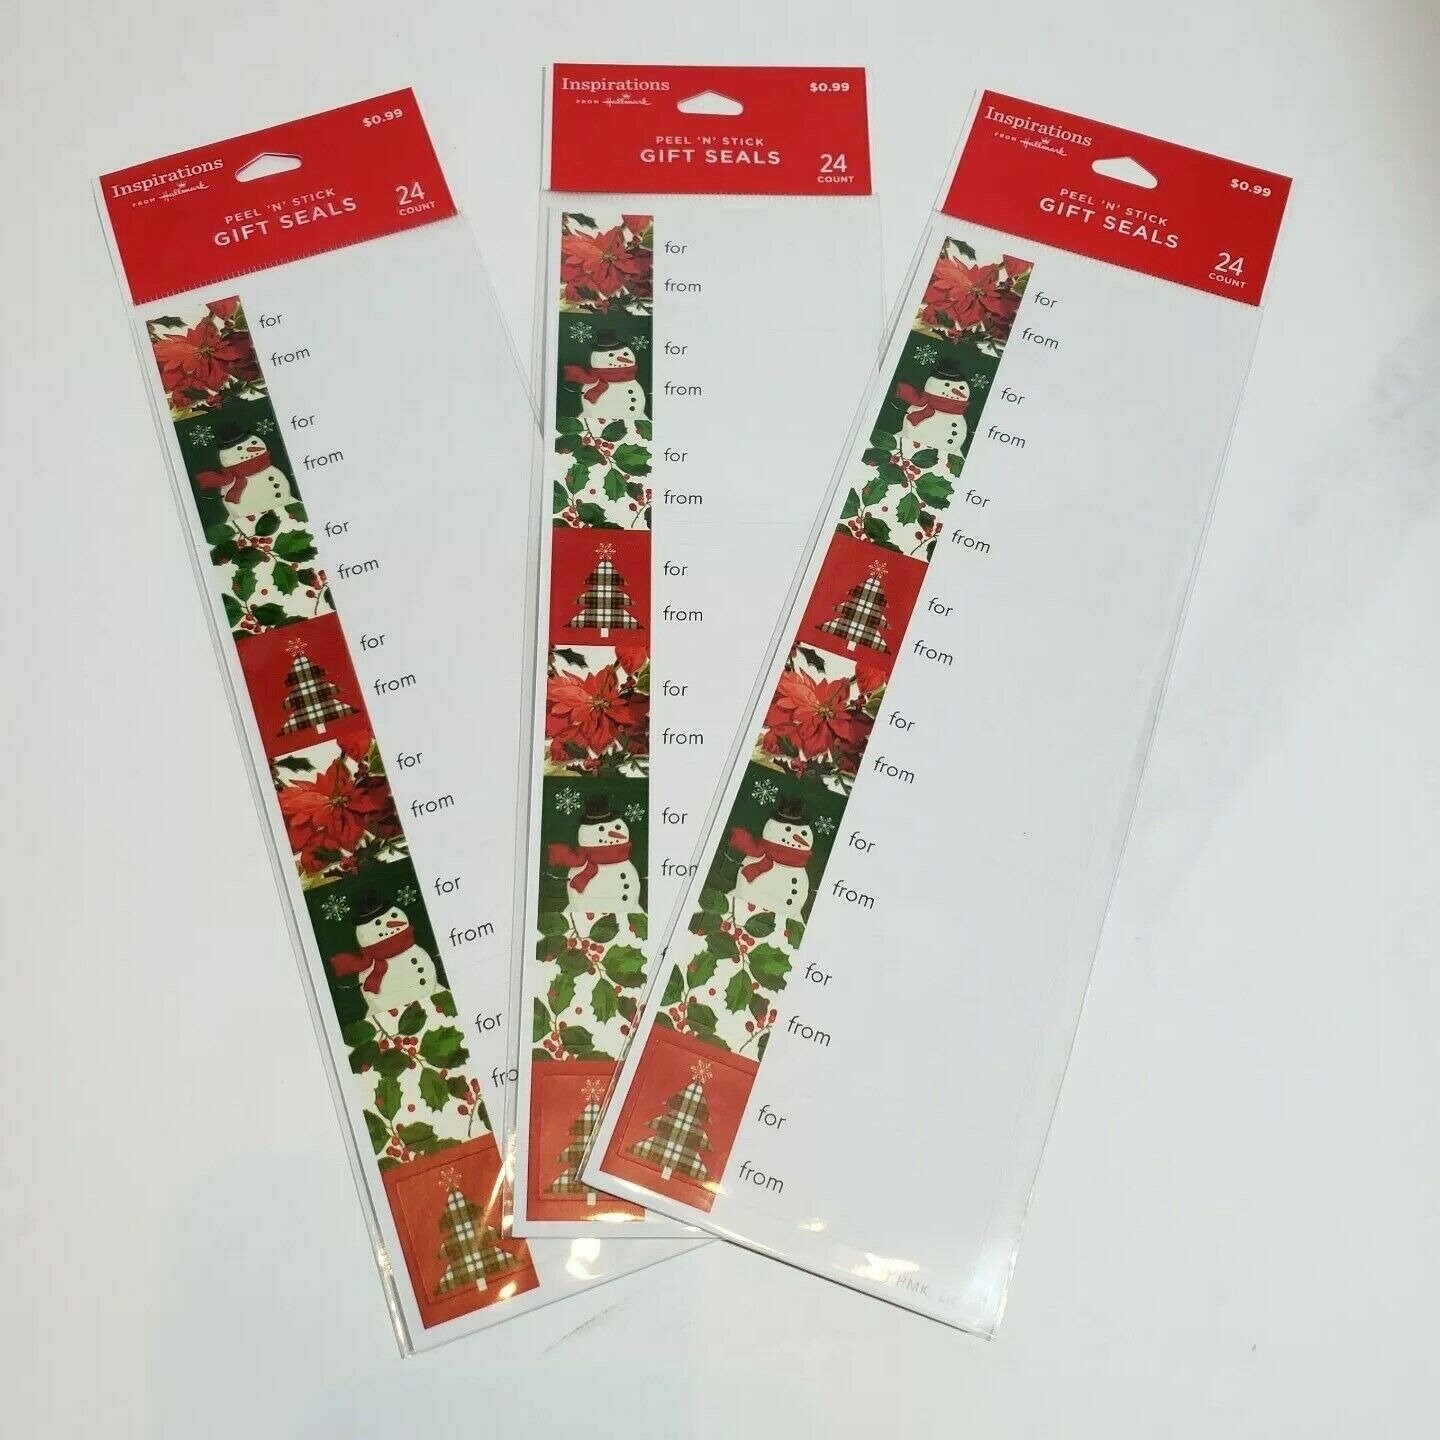 Details about   Hallmark Inspirations Peel N Stick Gift Seals Tags Christmas 256 CT 4 Pads 